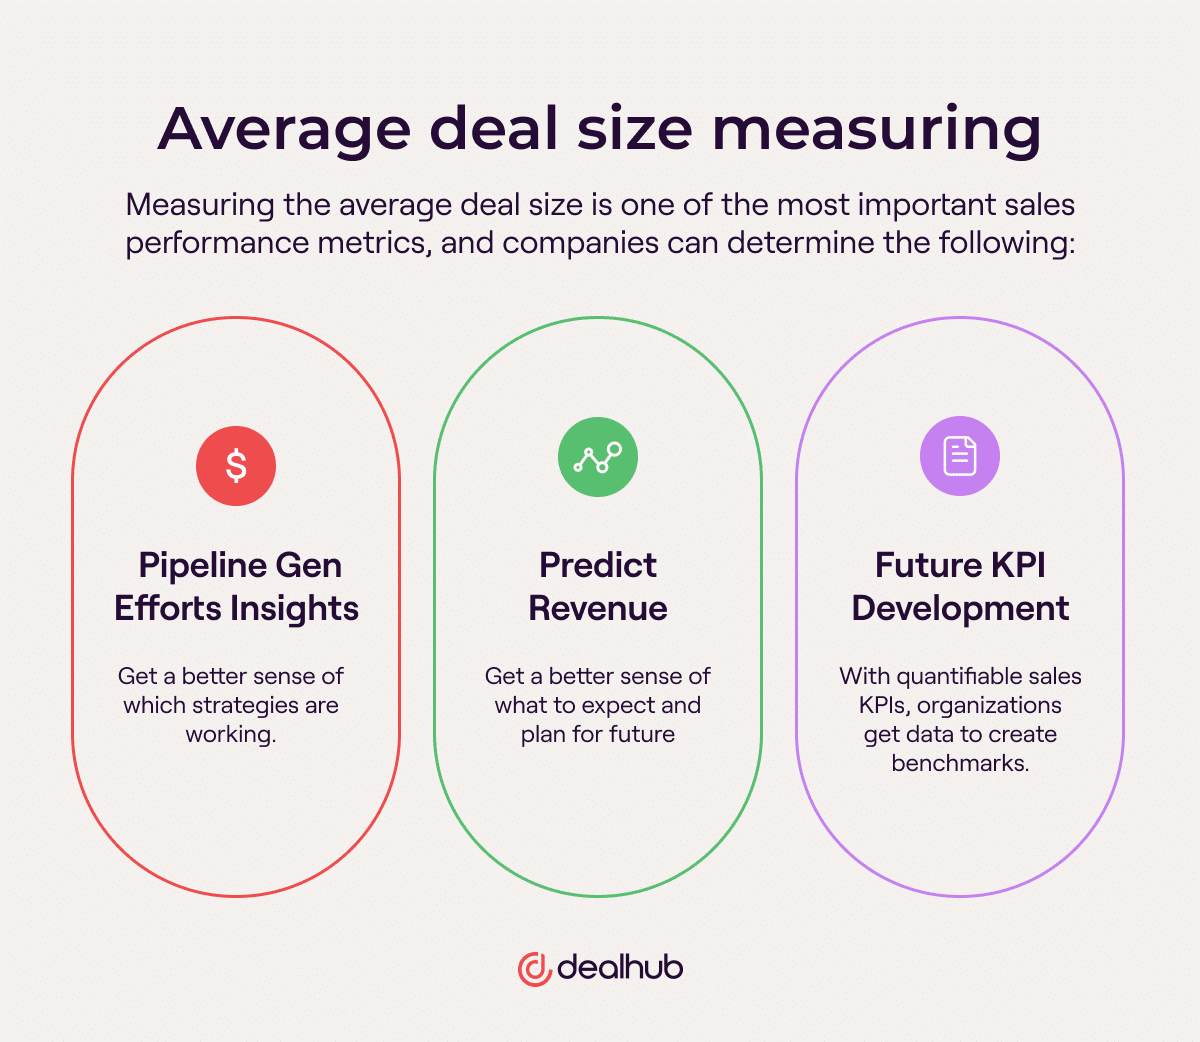 Importance of Measuring Average Deal Size